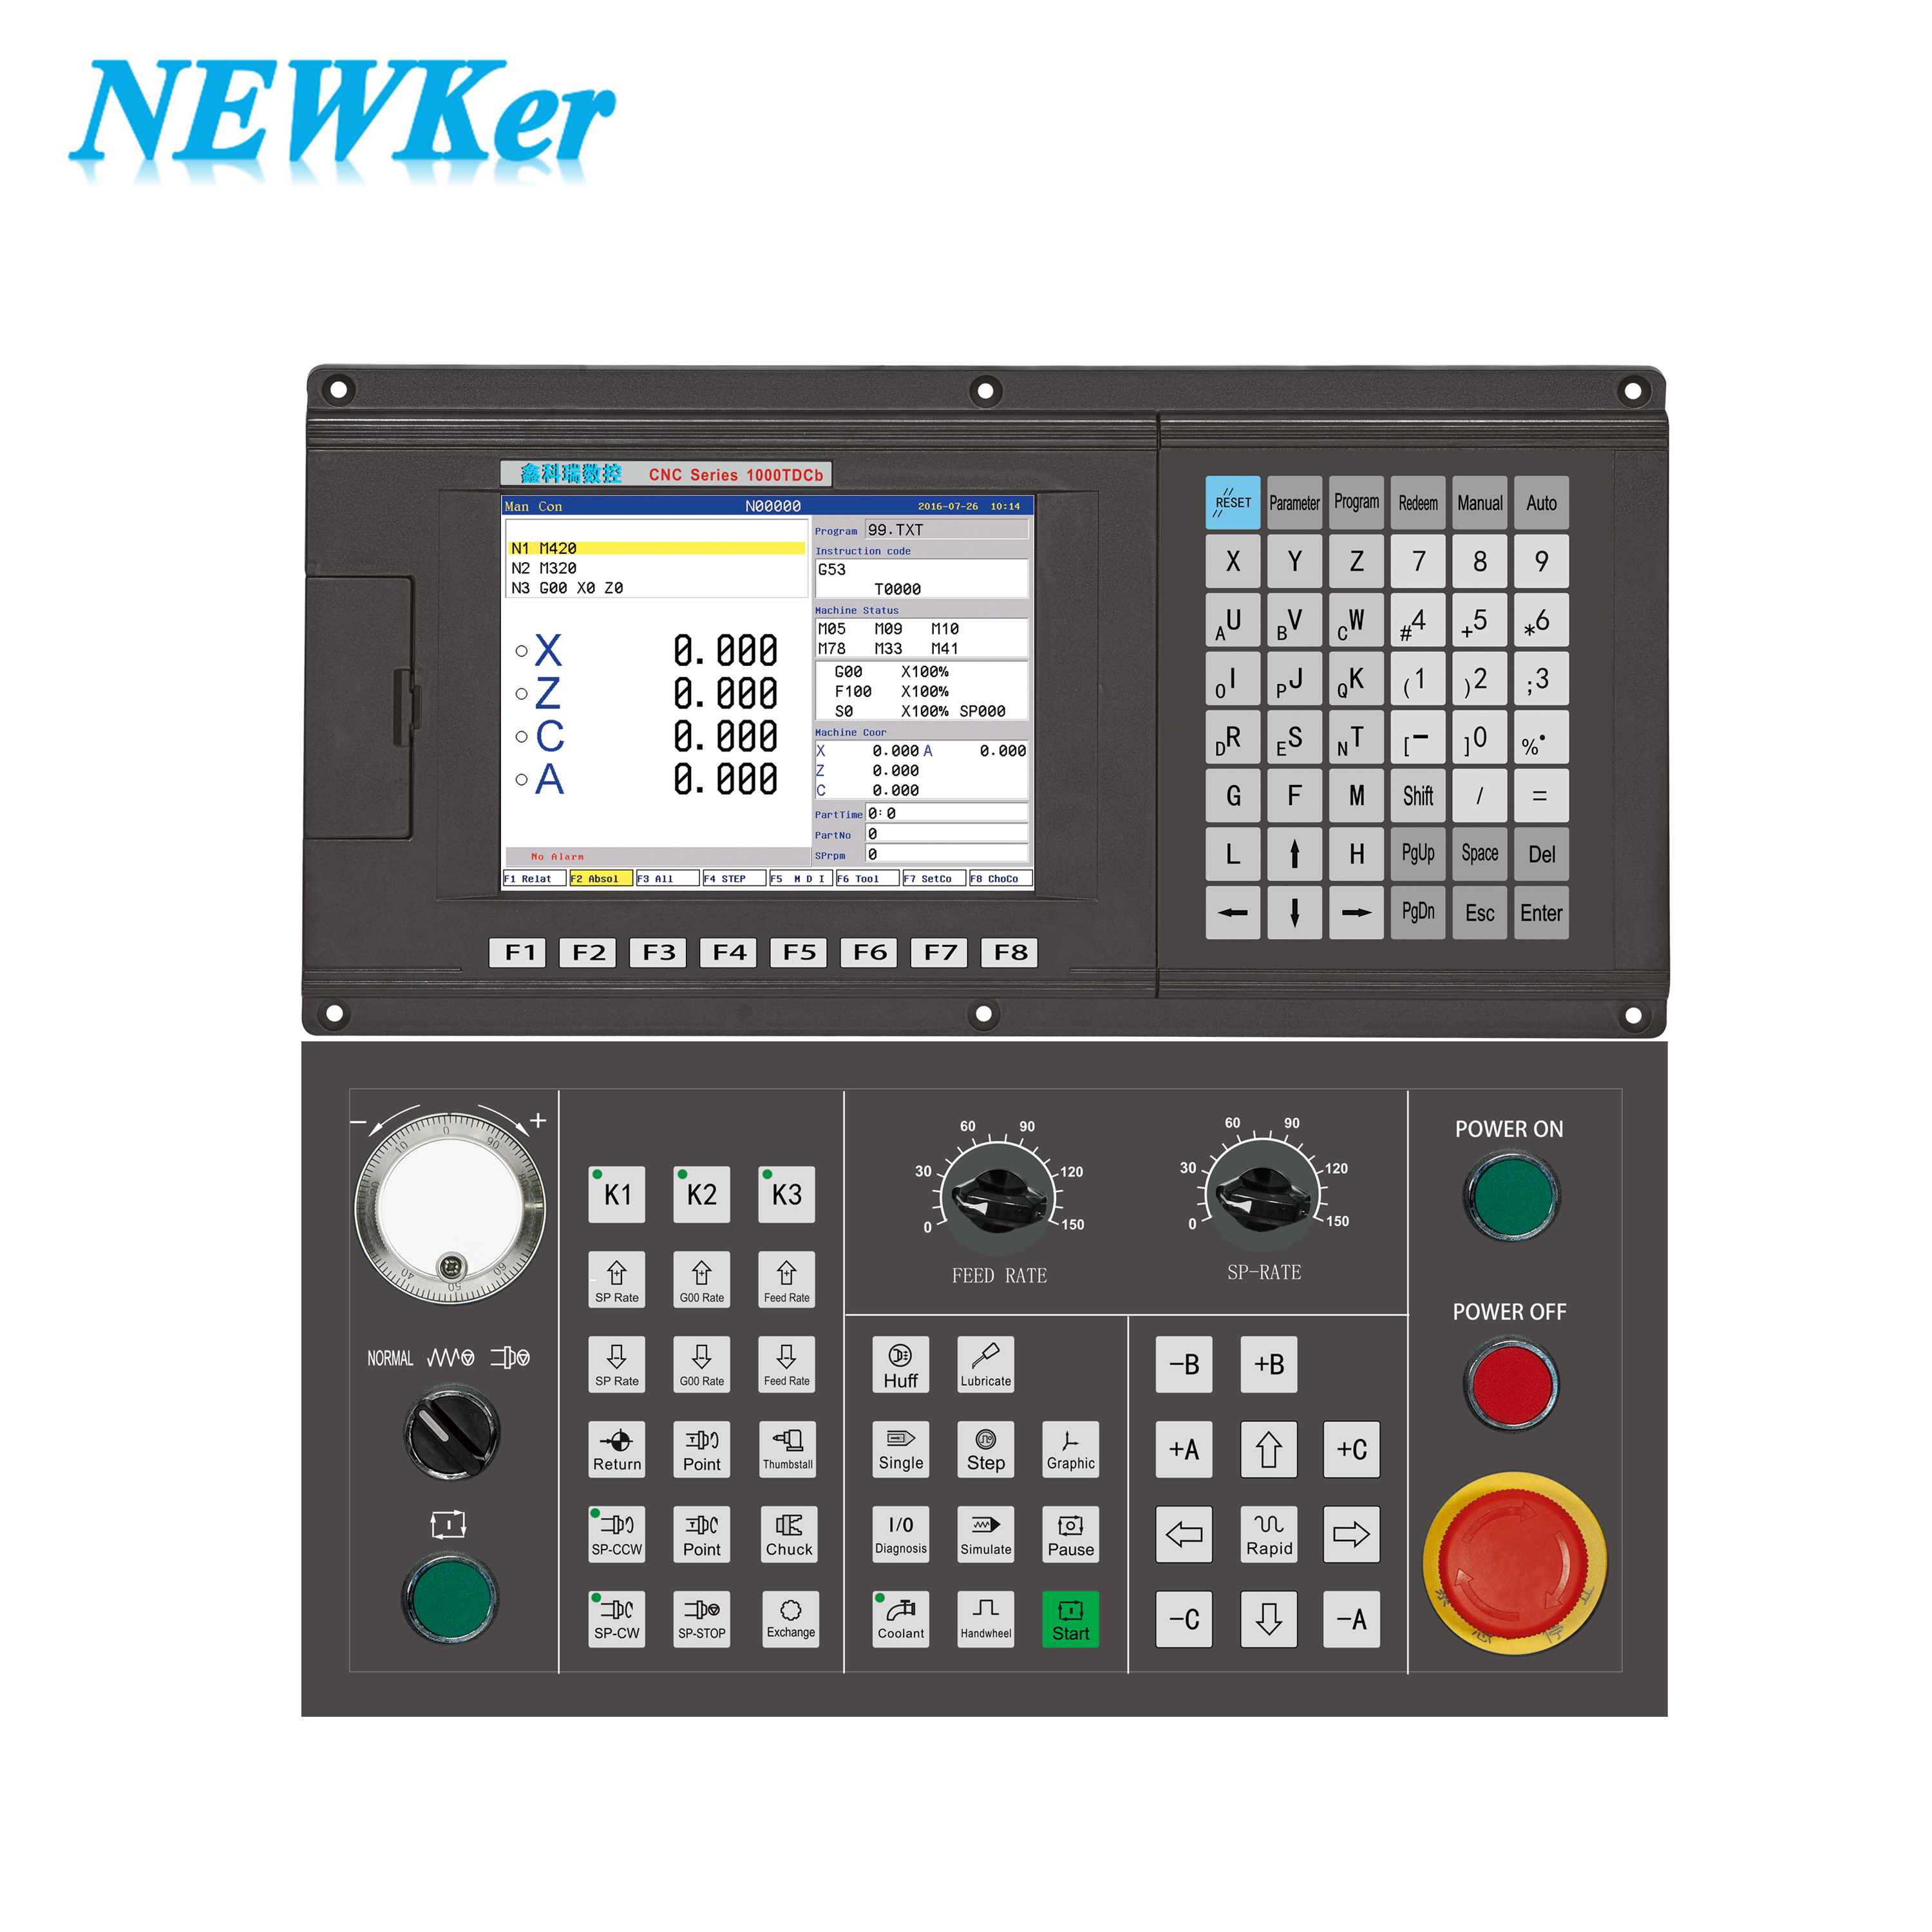 1000 Series 2 3 4 5 Axis Machining Center Controller with RTCP